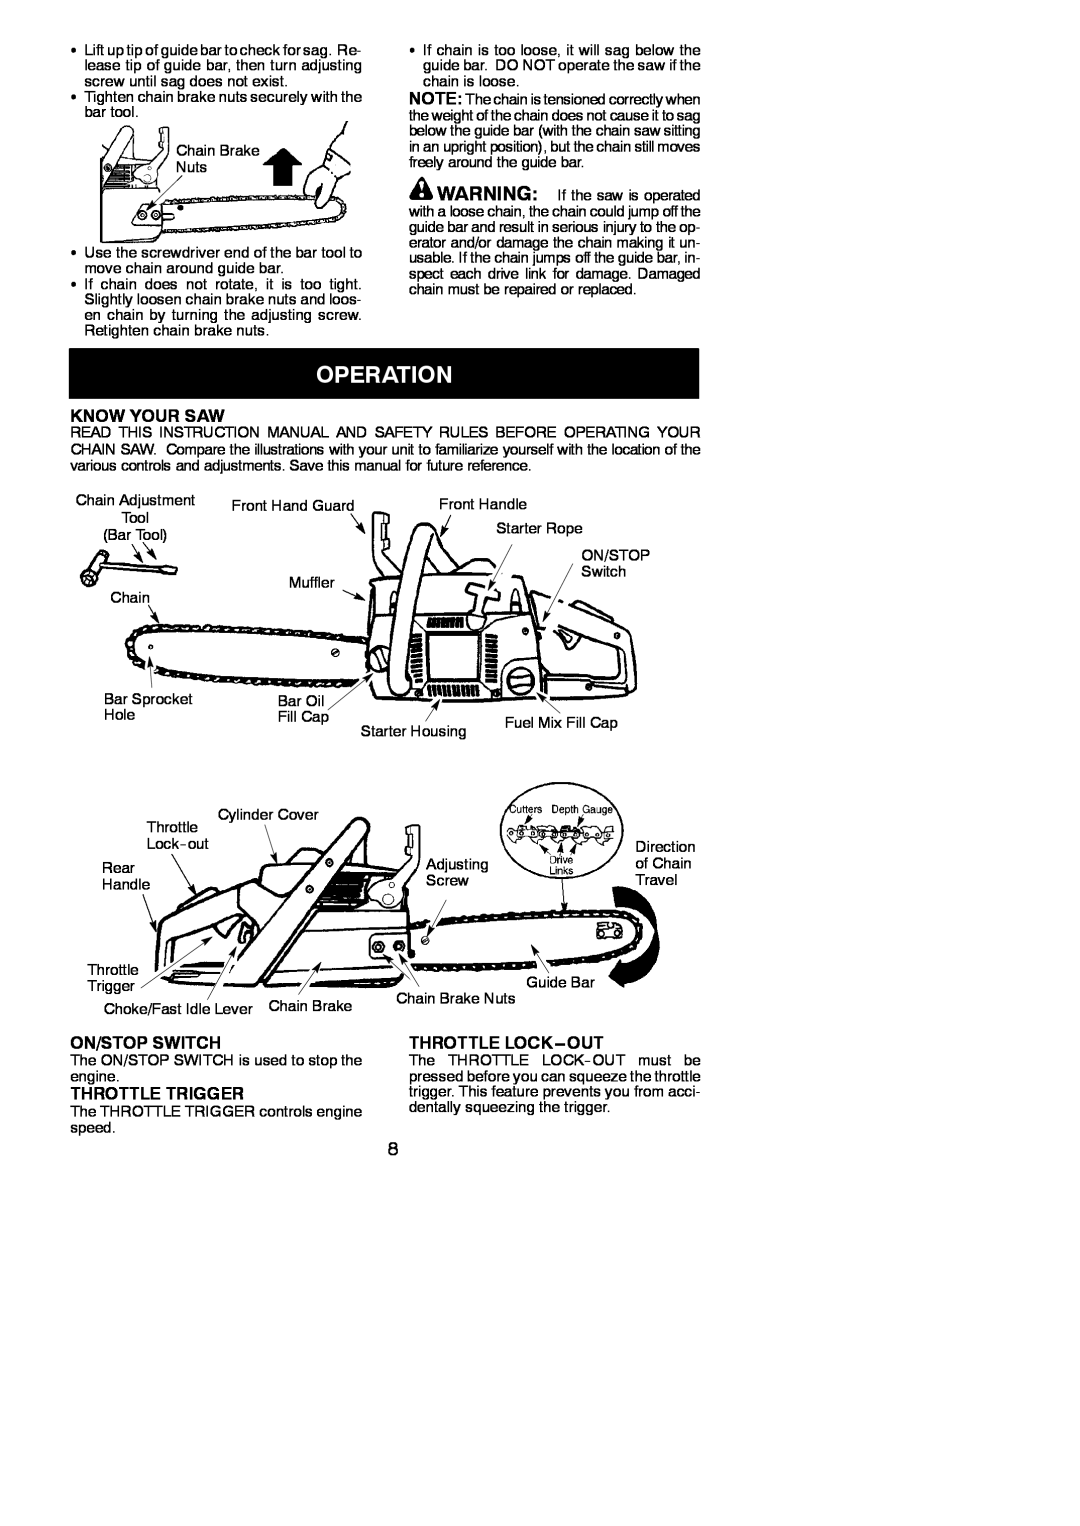 Poulan 952802075 instruction manual Operation, Know Your Saw, On/Stop Switch, Throttle Trigger, Throttle Lock---Out 